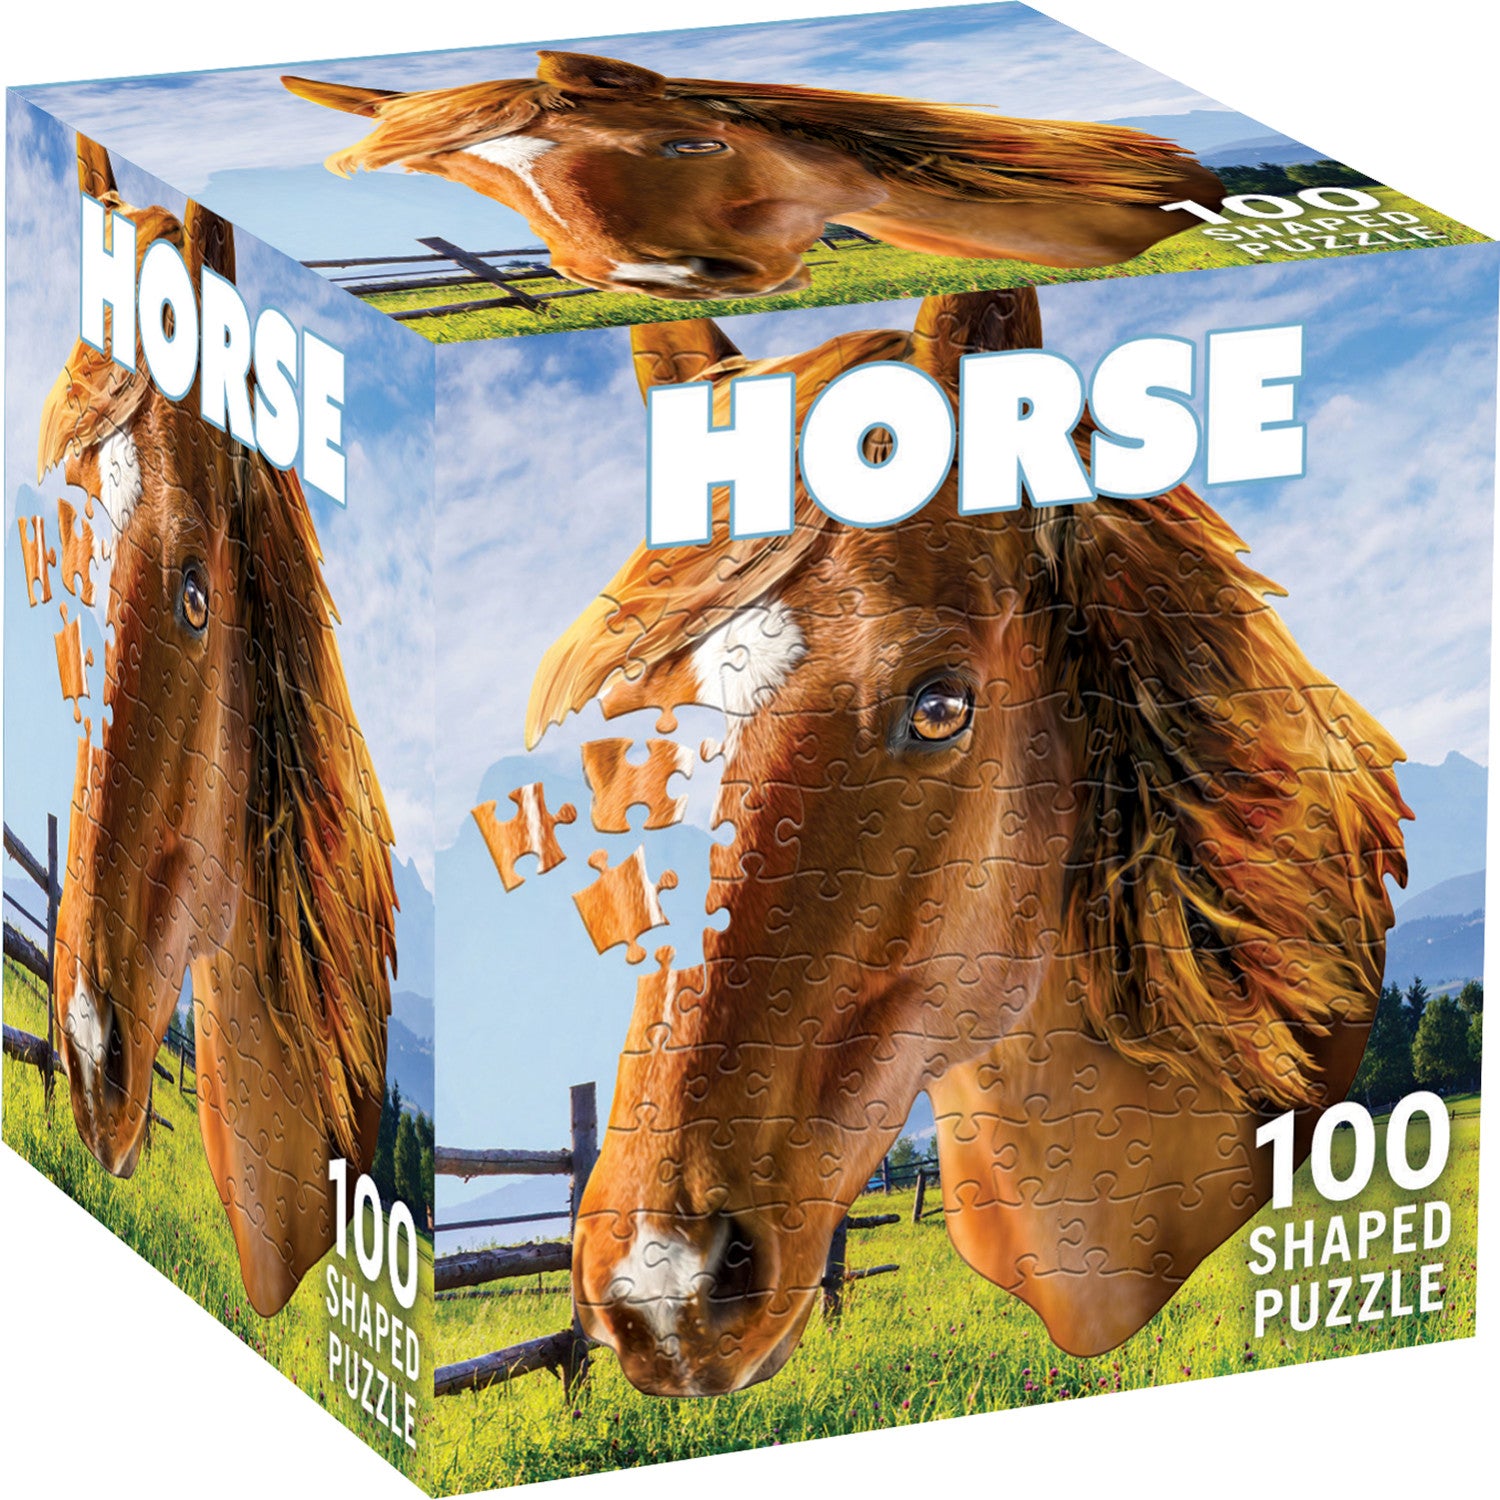 Horse 100 Piece Shaped Jigsaw Puzzle